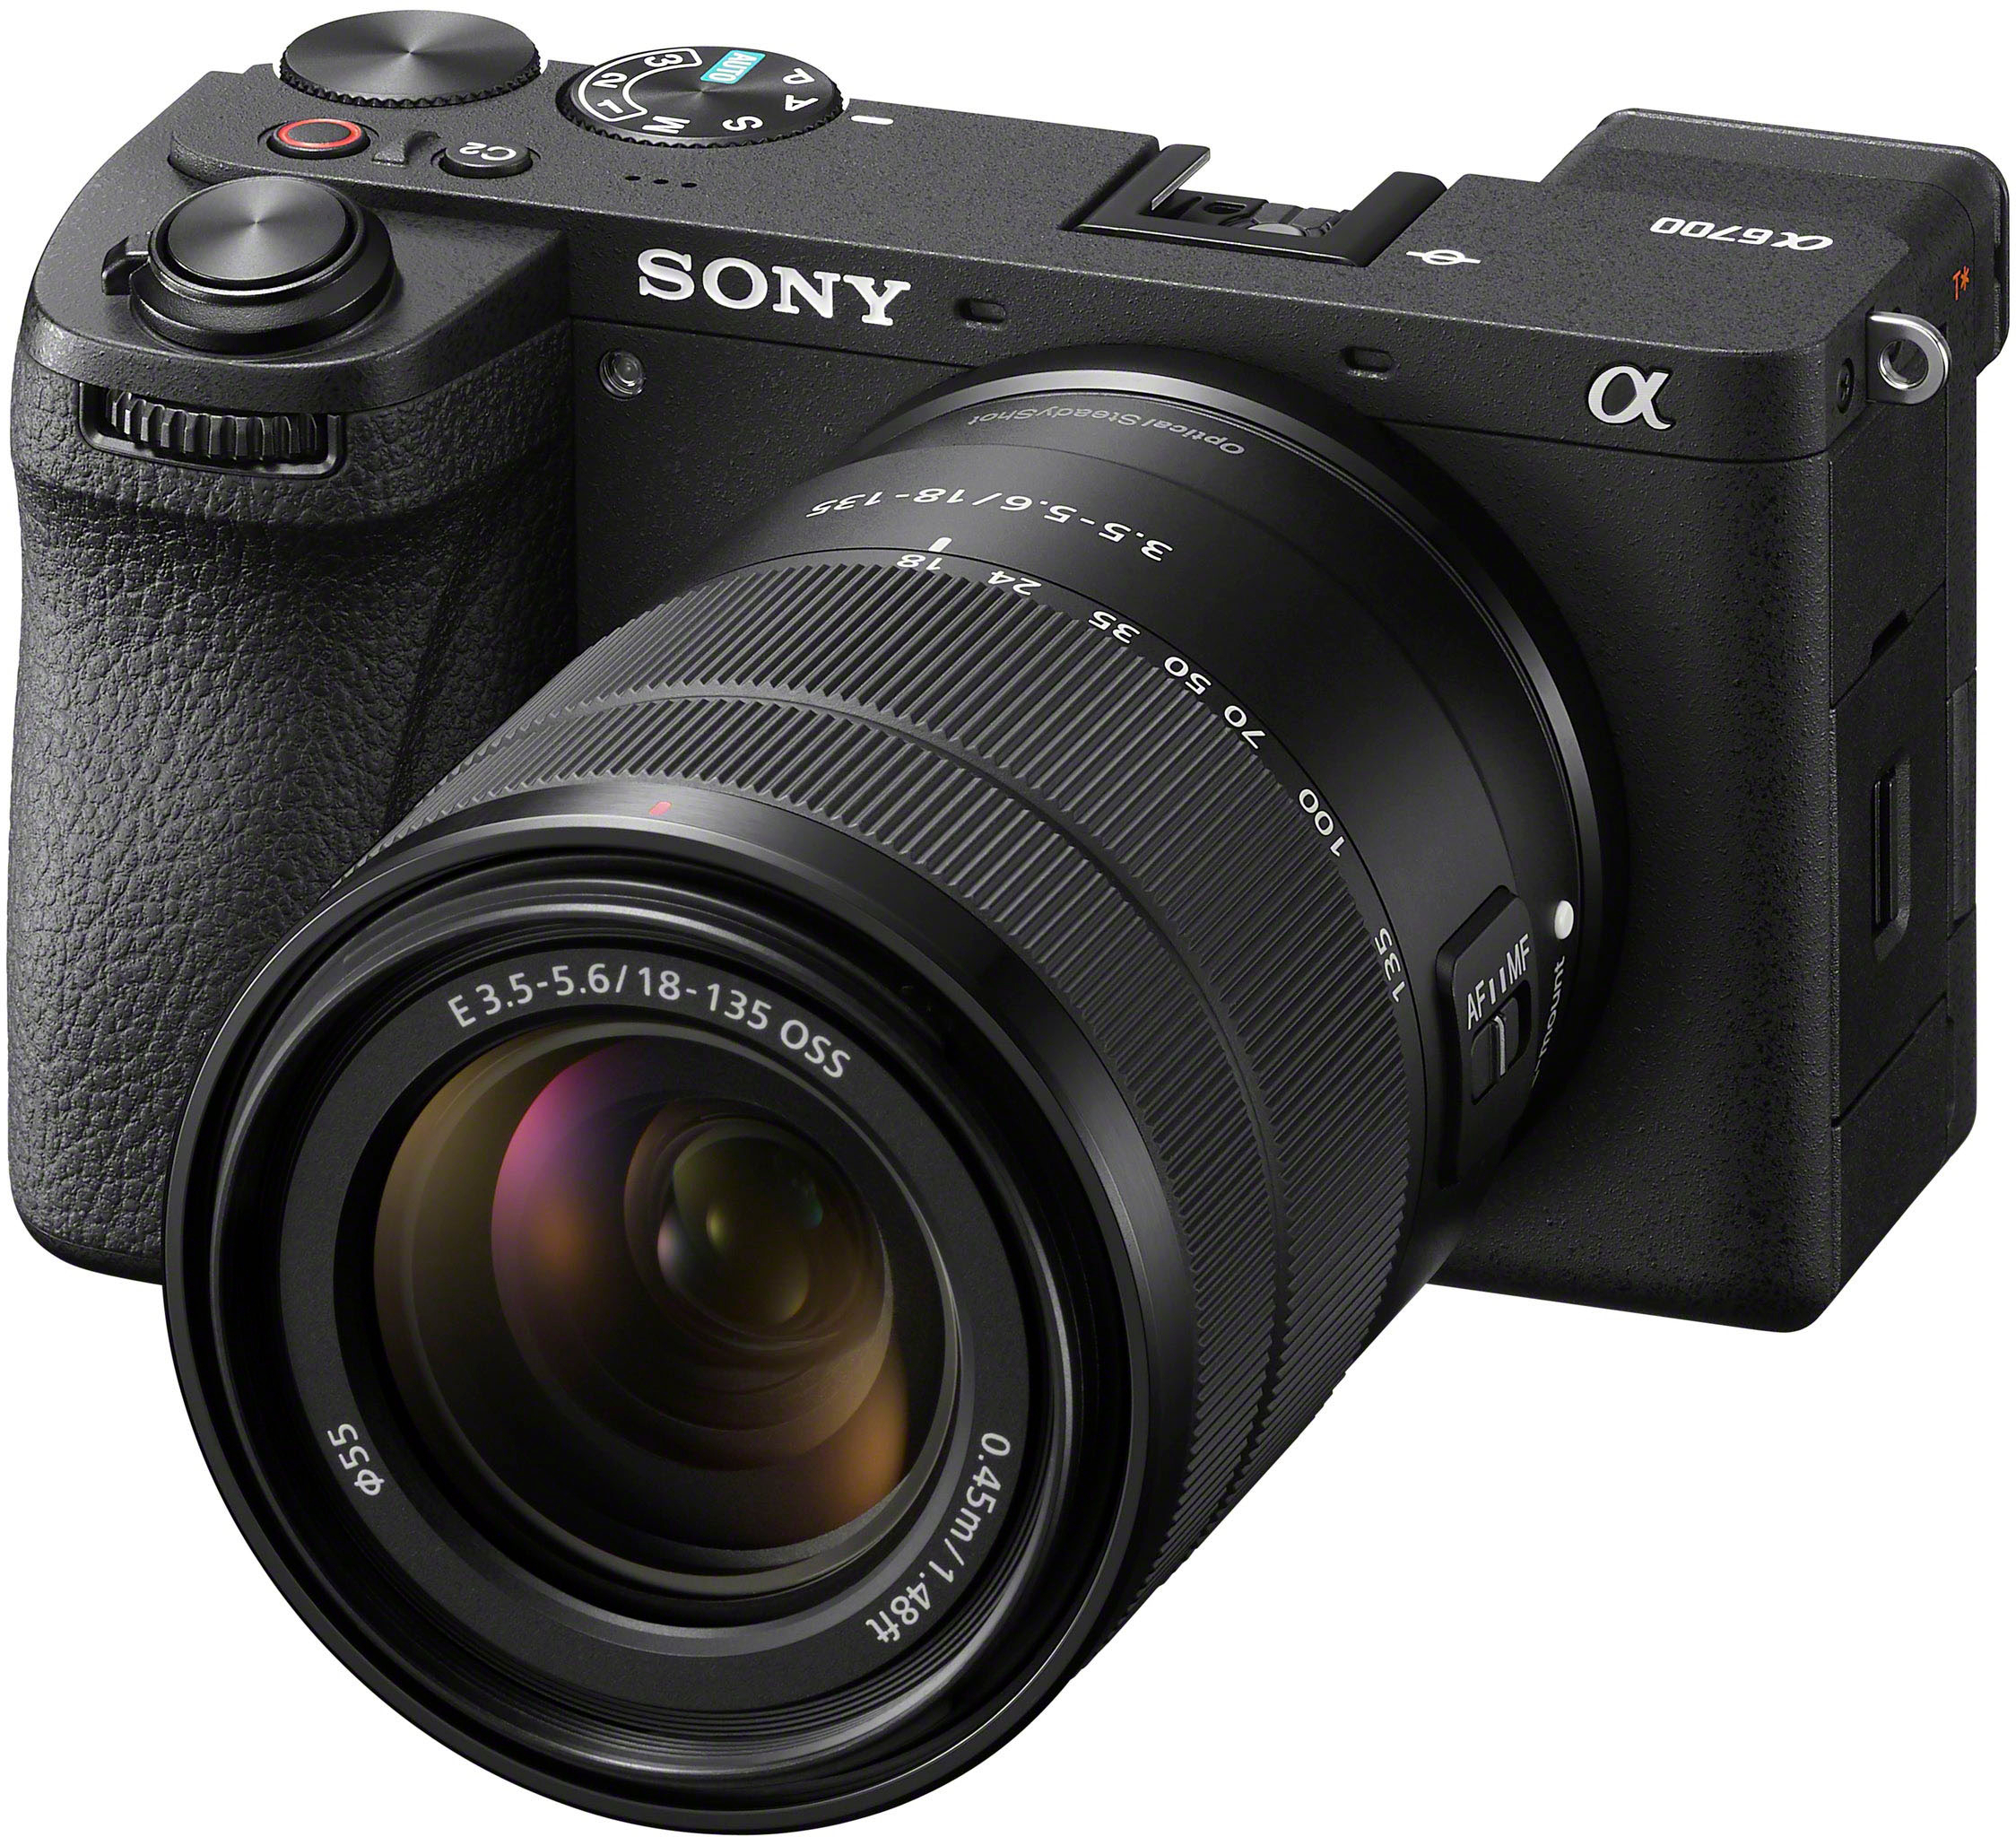 Sony Alpha Best mm Buy Black Camera 6700 Mirrorless E 18-135 Lens with ILCE6700M/B - APS-C